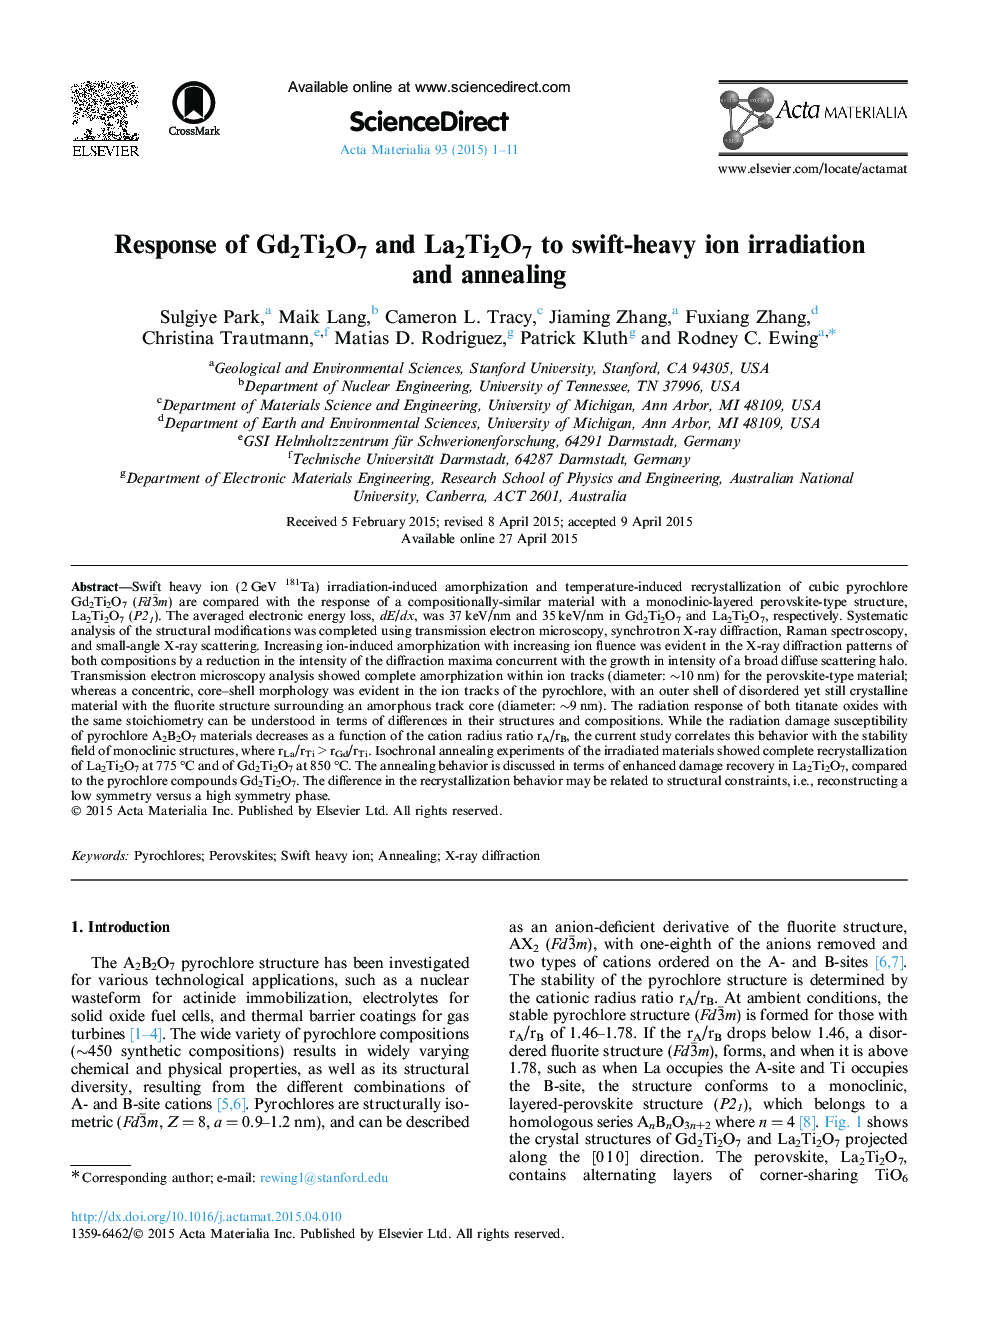 Response of Gd2Ti2O7 and La2Ti2O7 to swift-heavy ion irradiation and annealing